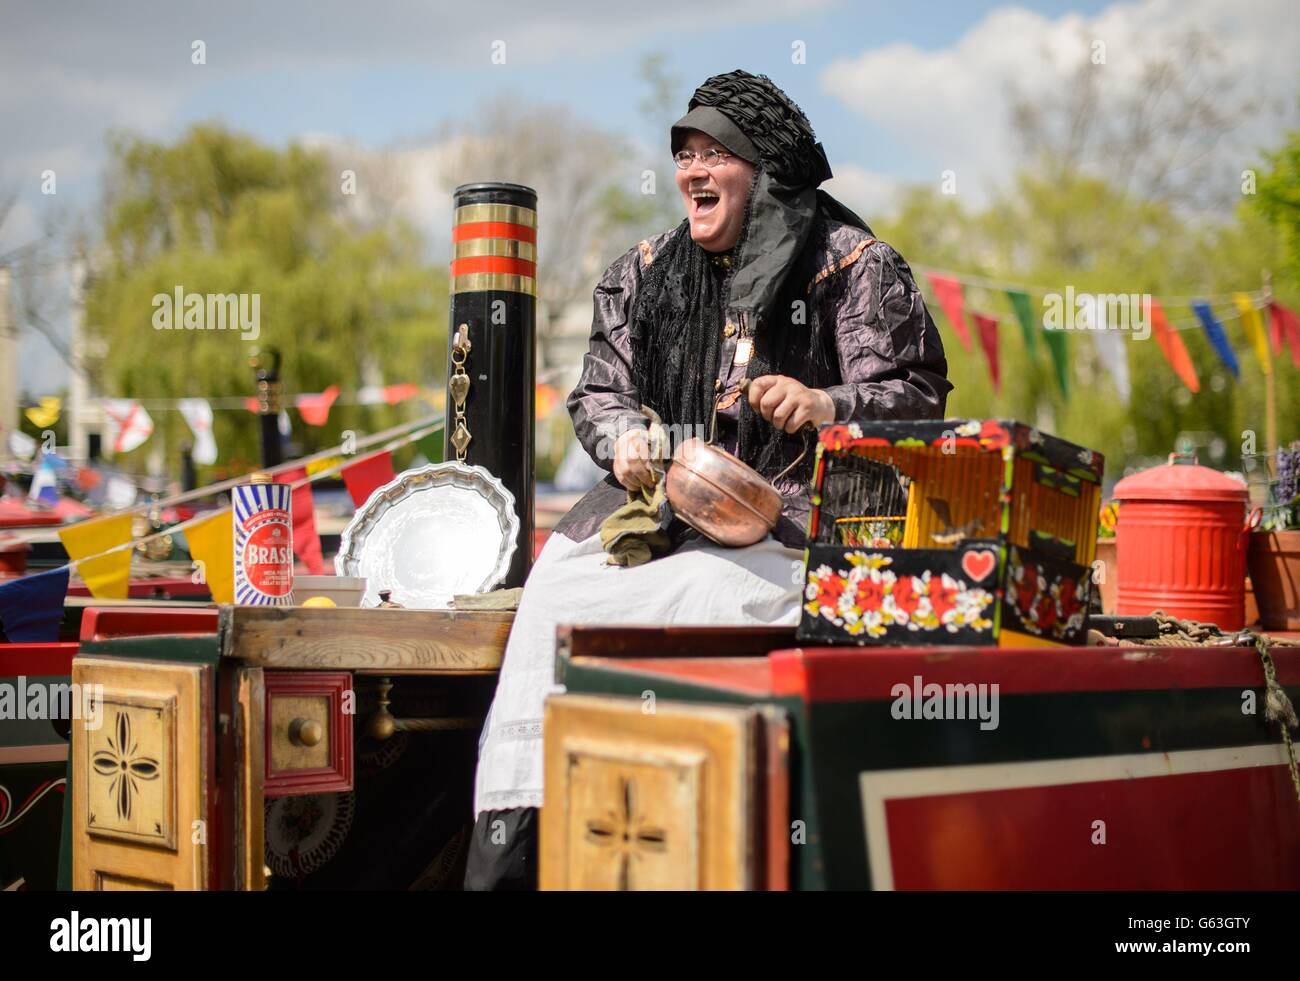 Linda Anfuso enjoys the sunny weather aboard her narrowboat, at the Canalway Cavalcade, a gathering of over 100 narrowboats in Little Venice, London. Stock Photo